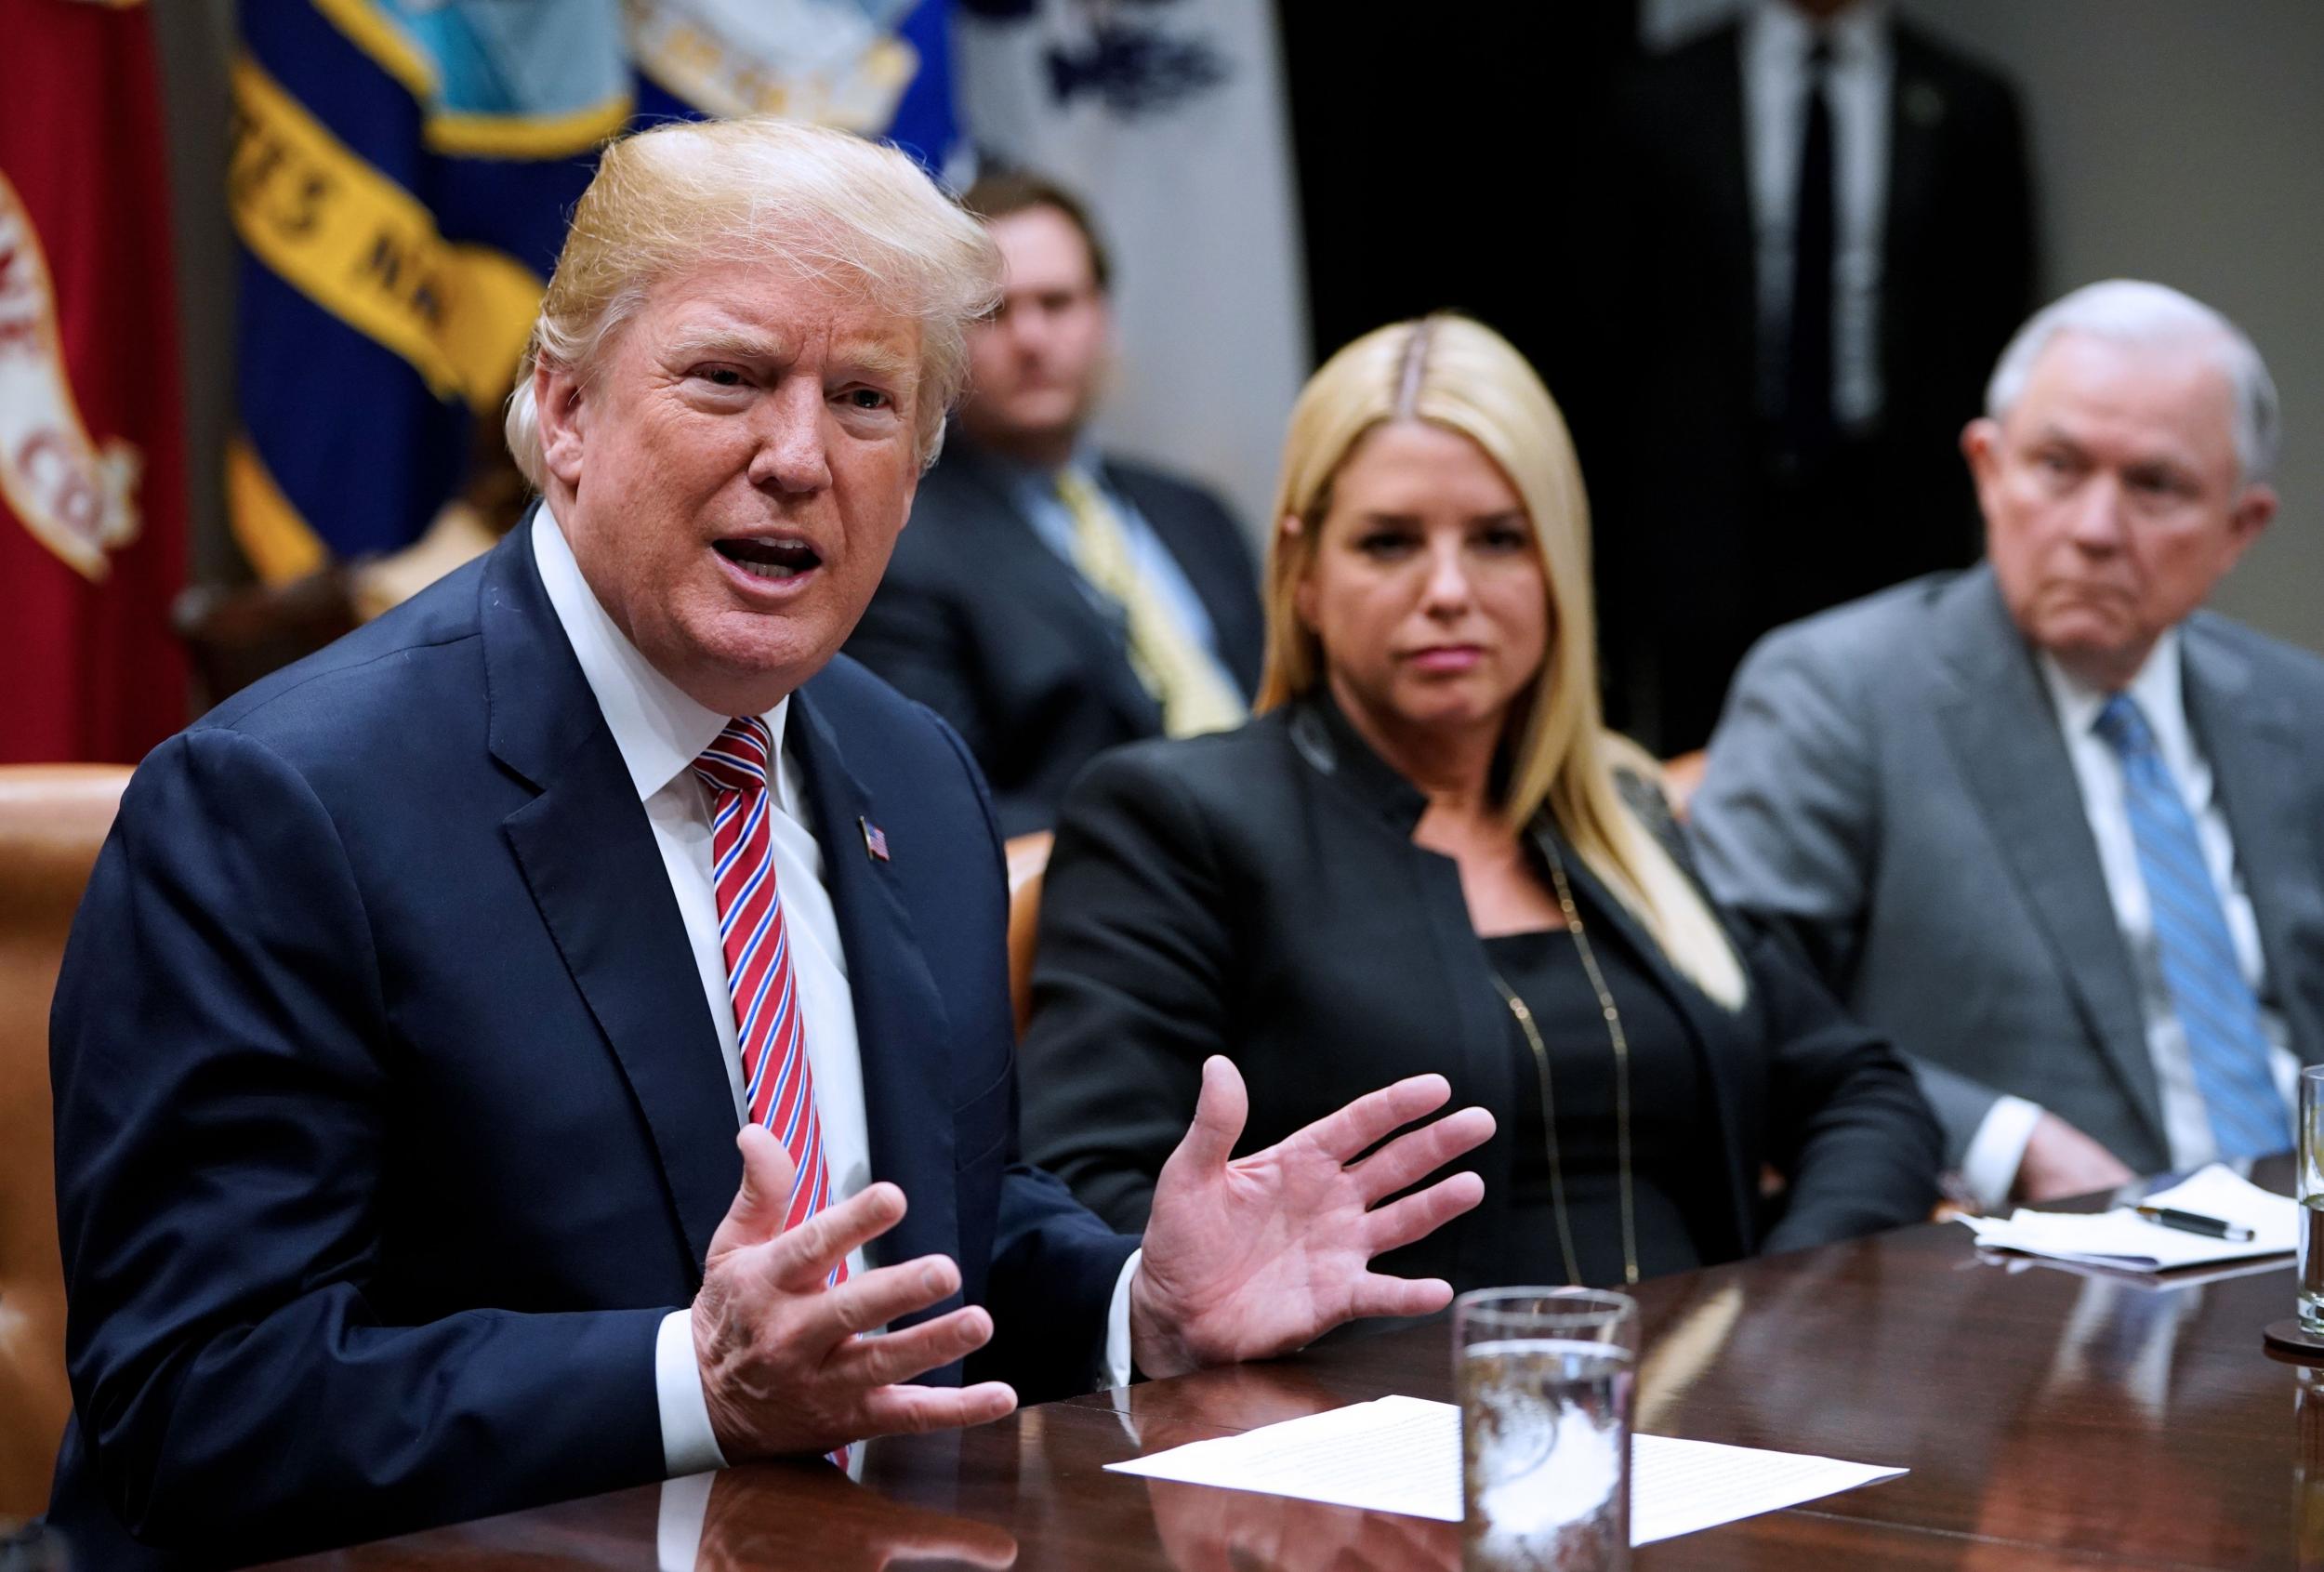 Mr Trump during a meeting at the White House alongside Florida Attorney General Pam Bondi and US Attorney General Jeff Sessions